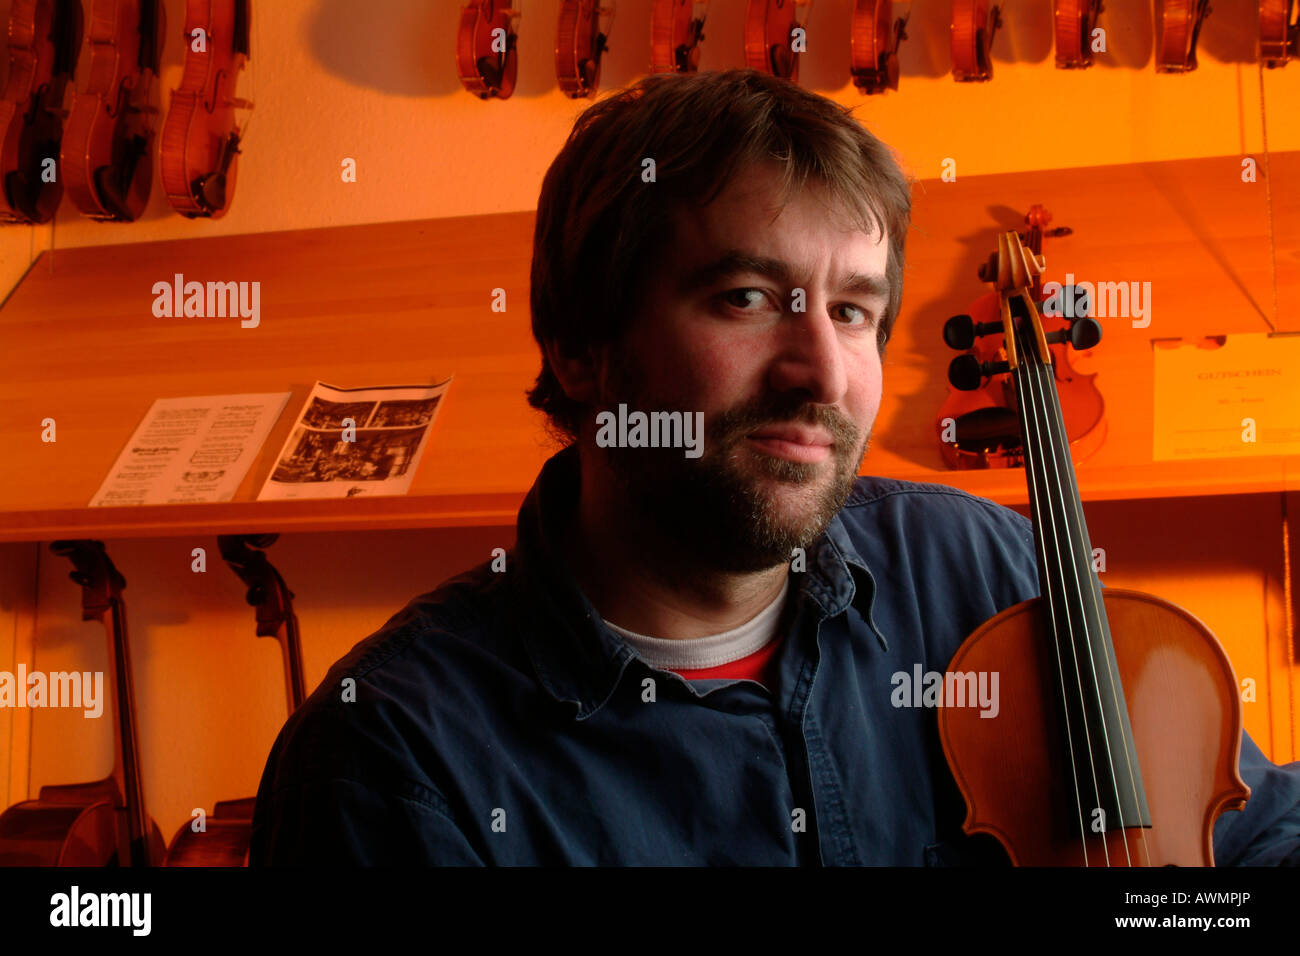 Violin-maker (luthier) in his showroom holding a violin Stock Photo